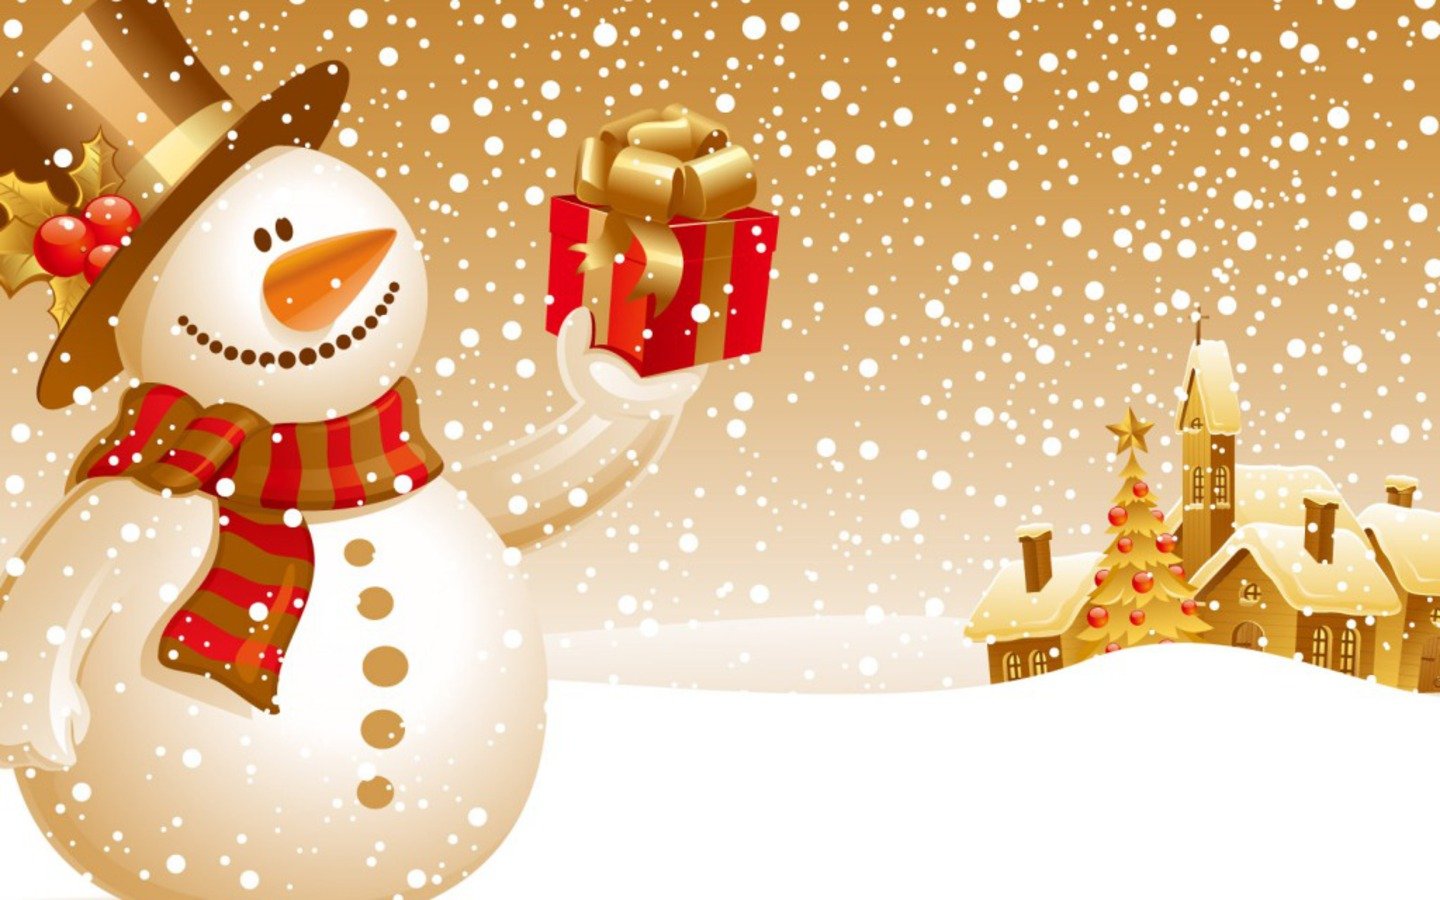 Cute Christmas Backgrounds 9269 Hd Wallpapers in Celebrations 1440x900